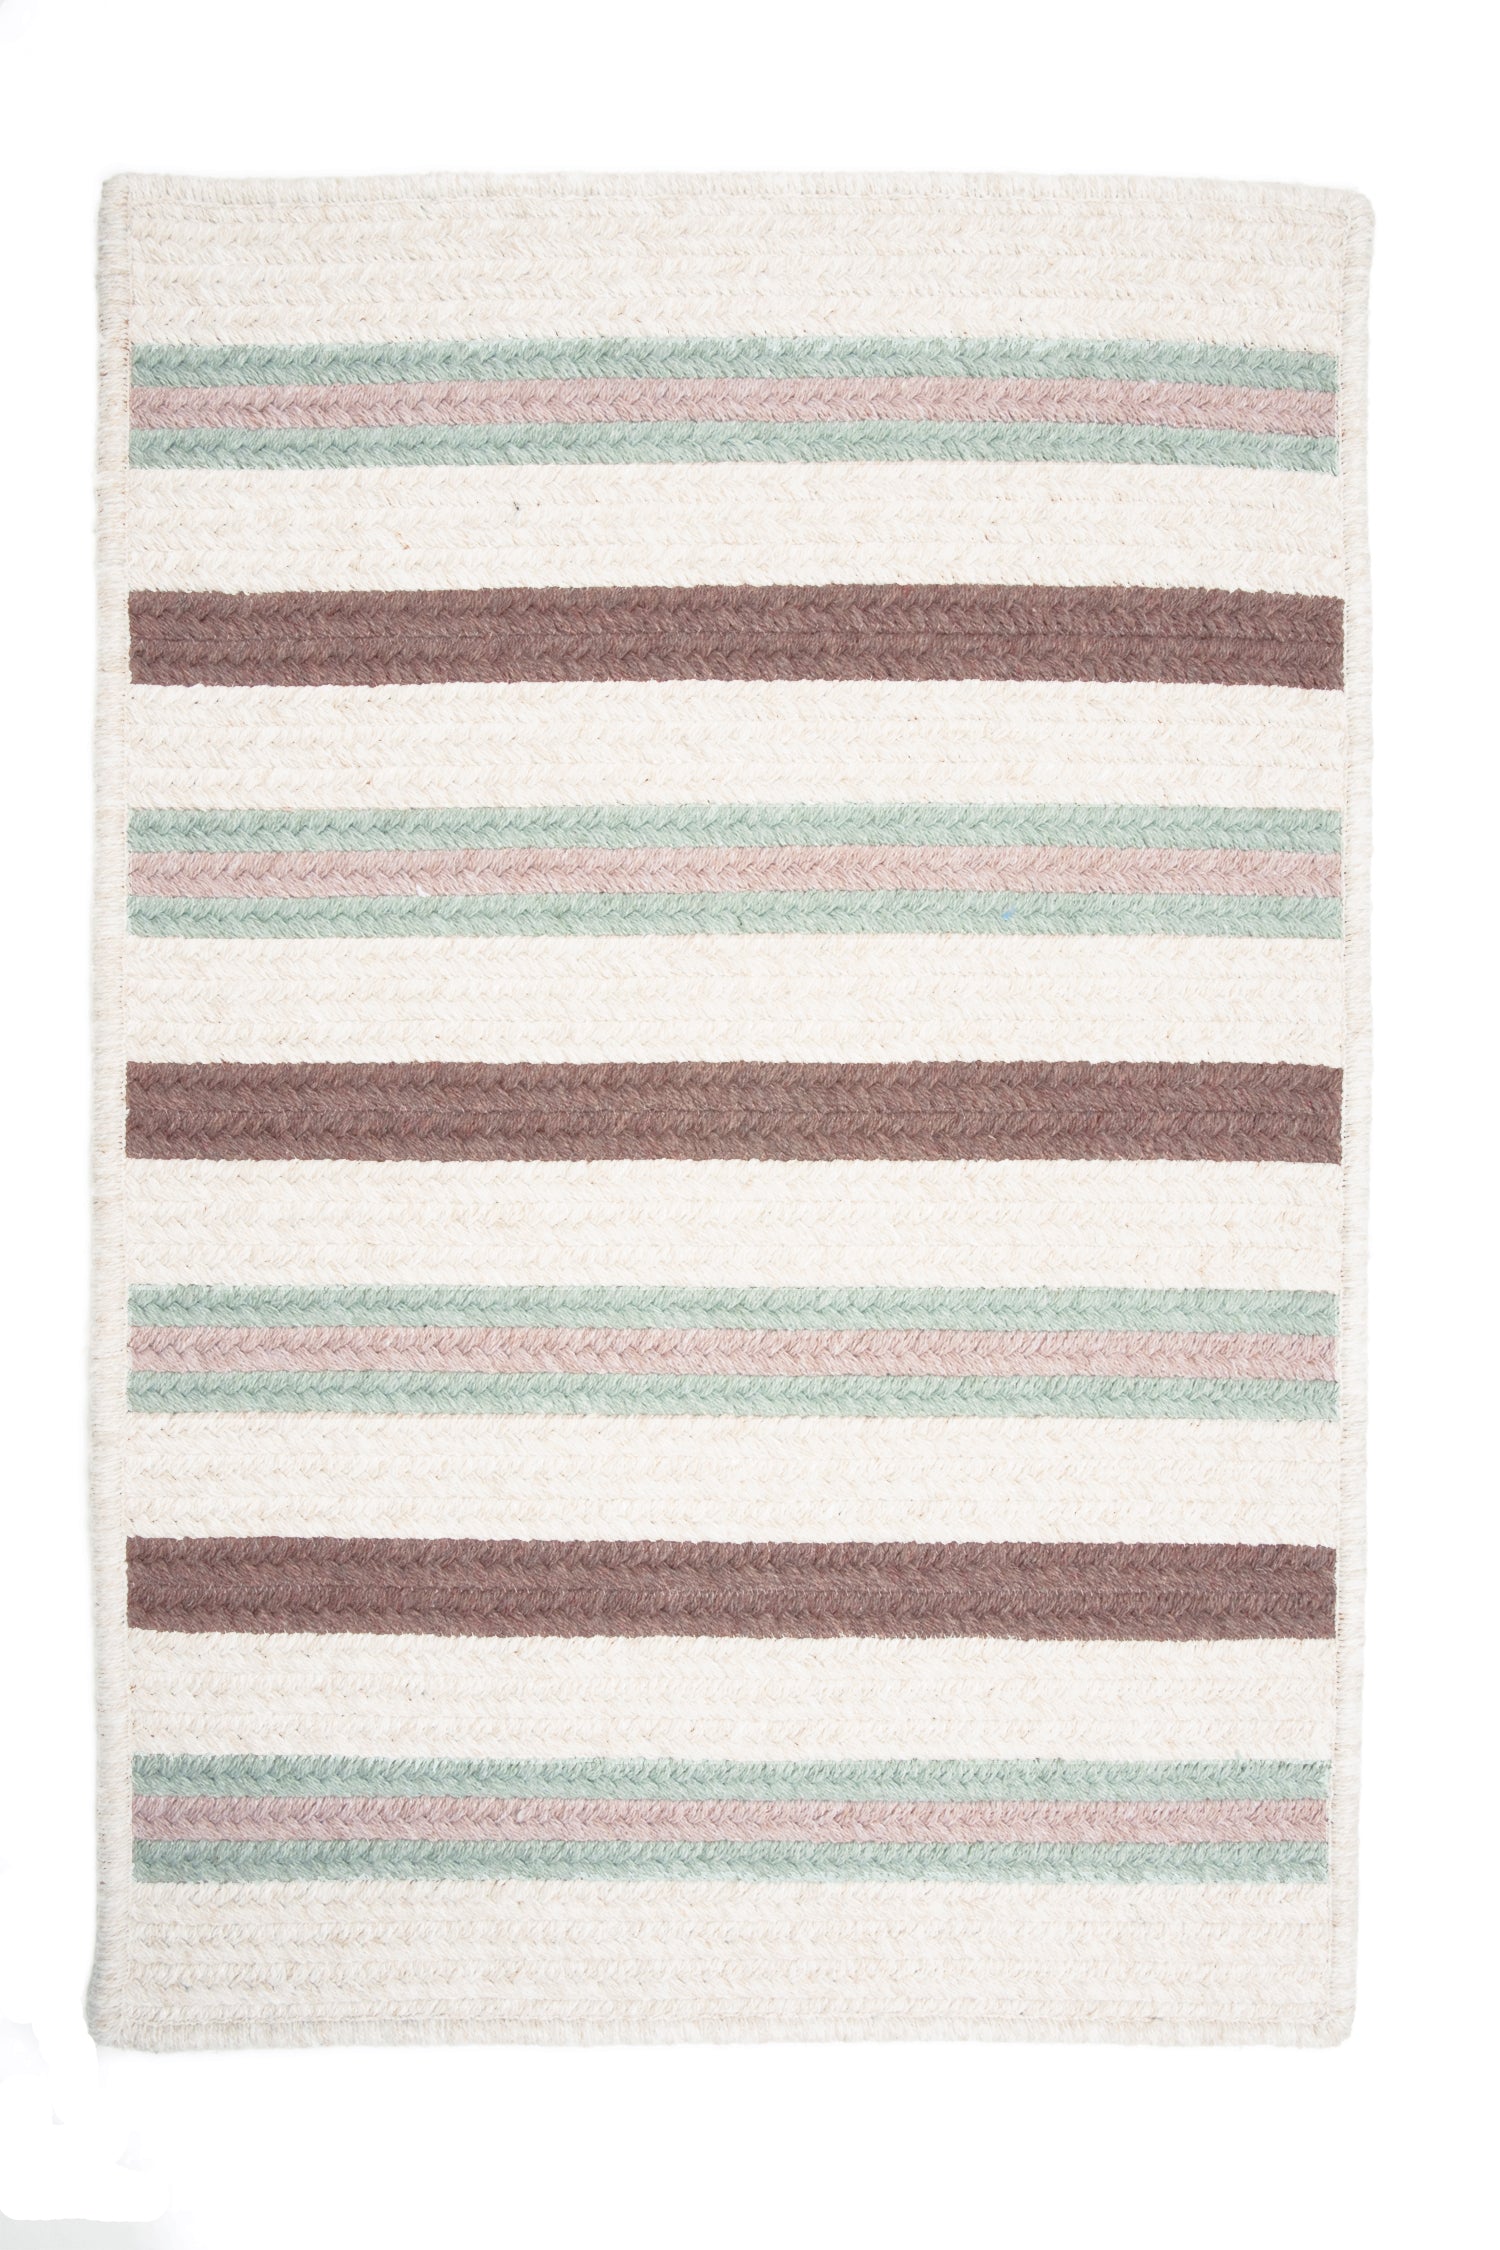 Colonial Mills Allure AL69 Misted Green Stripes Area Rug